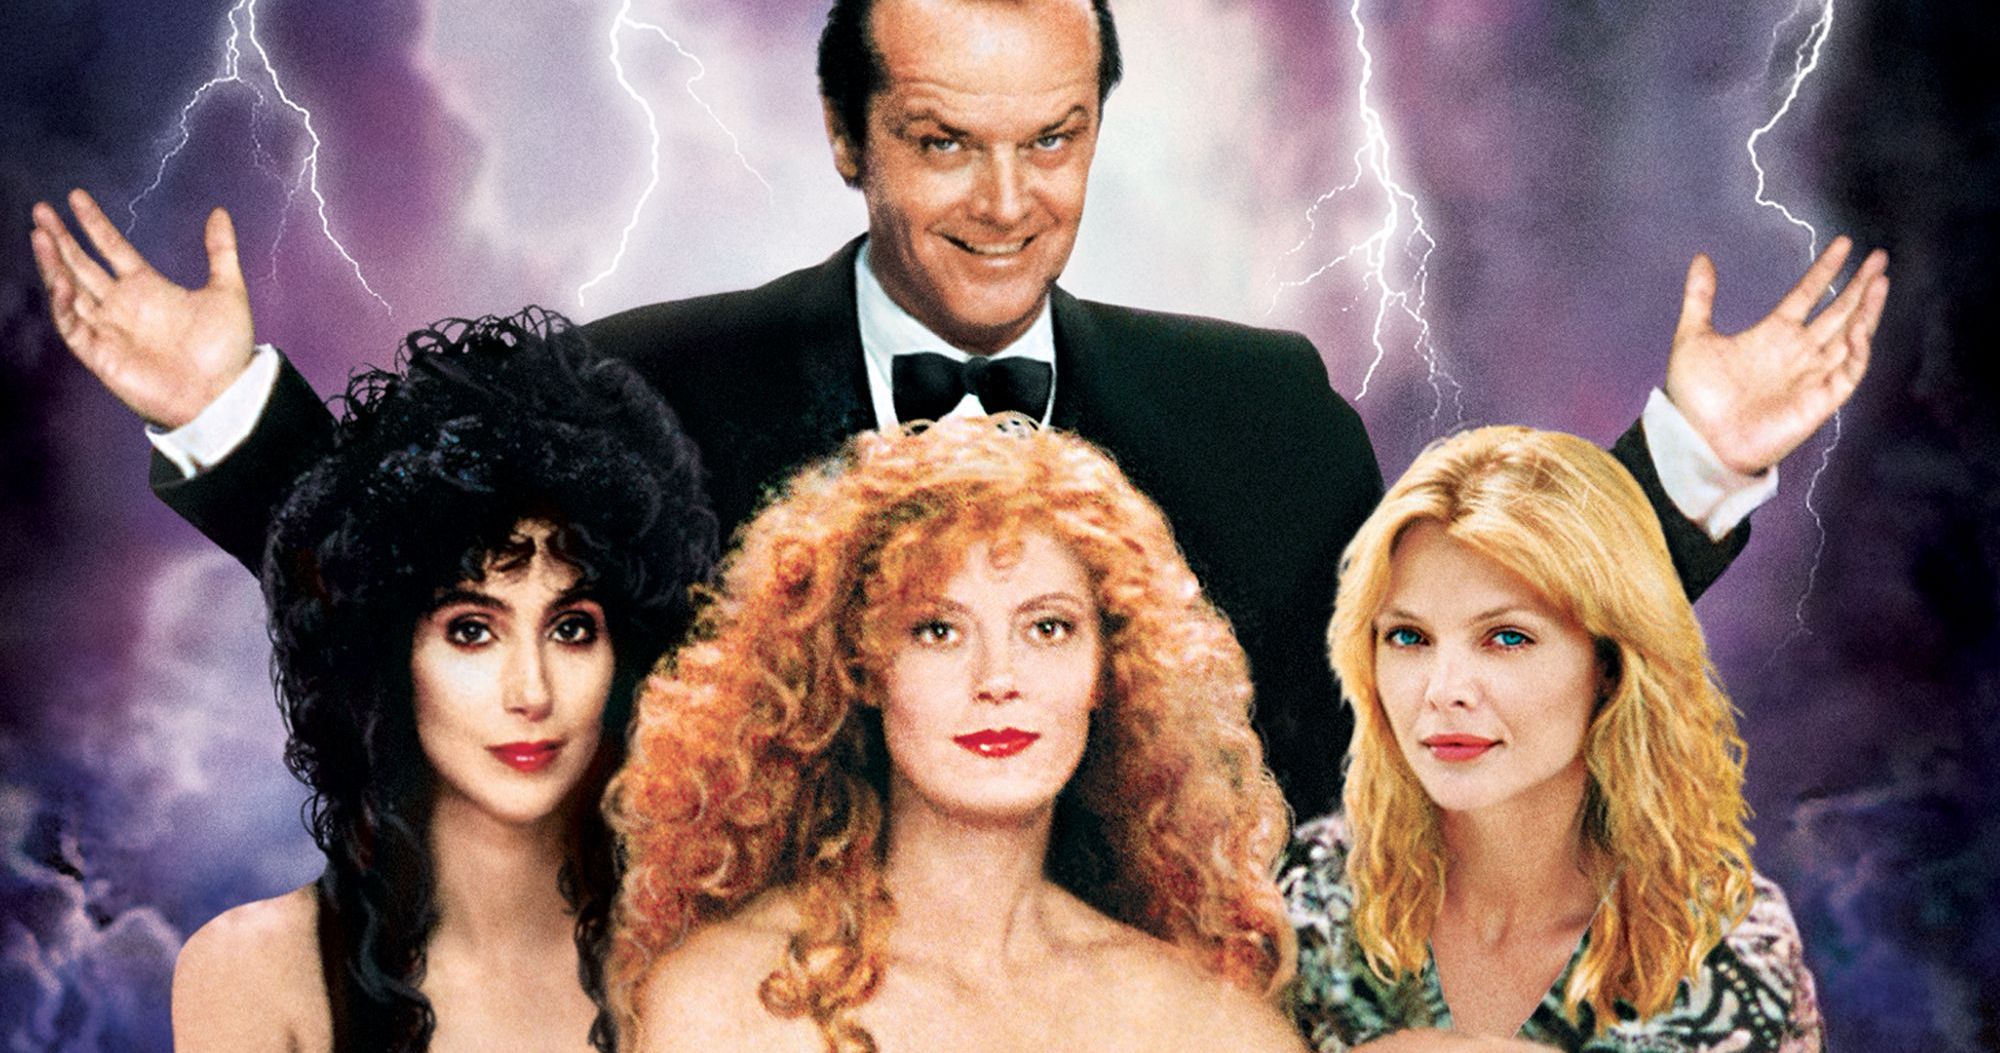 The Witches of Eastwick Remake Moves Ahead with Director Ninja Thyberg